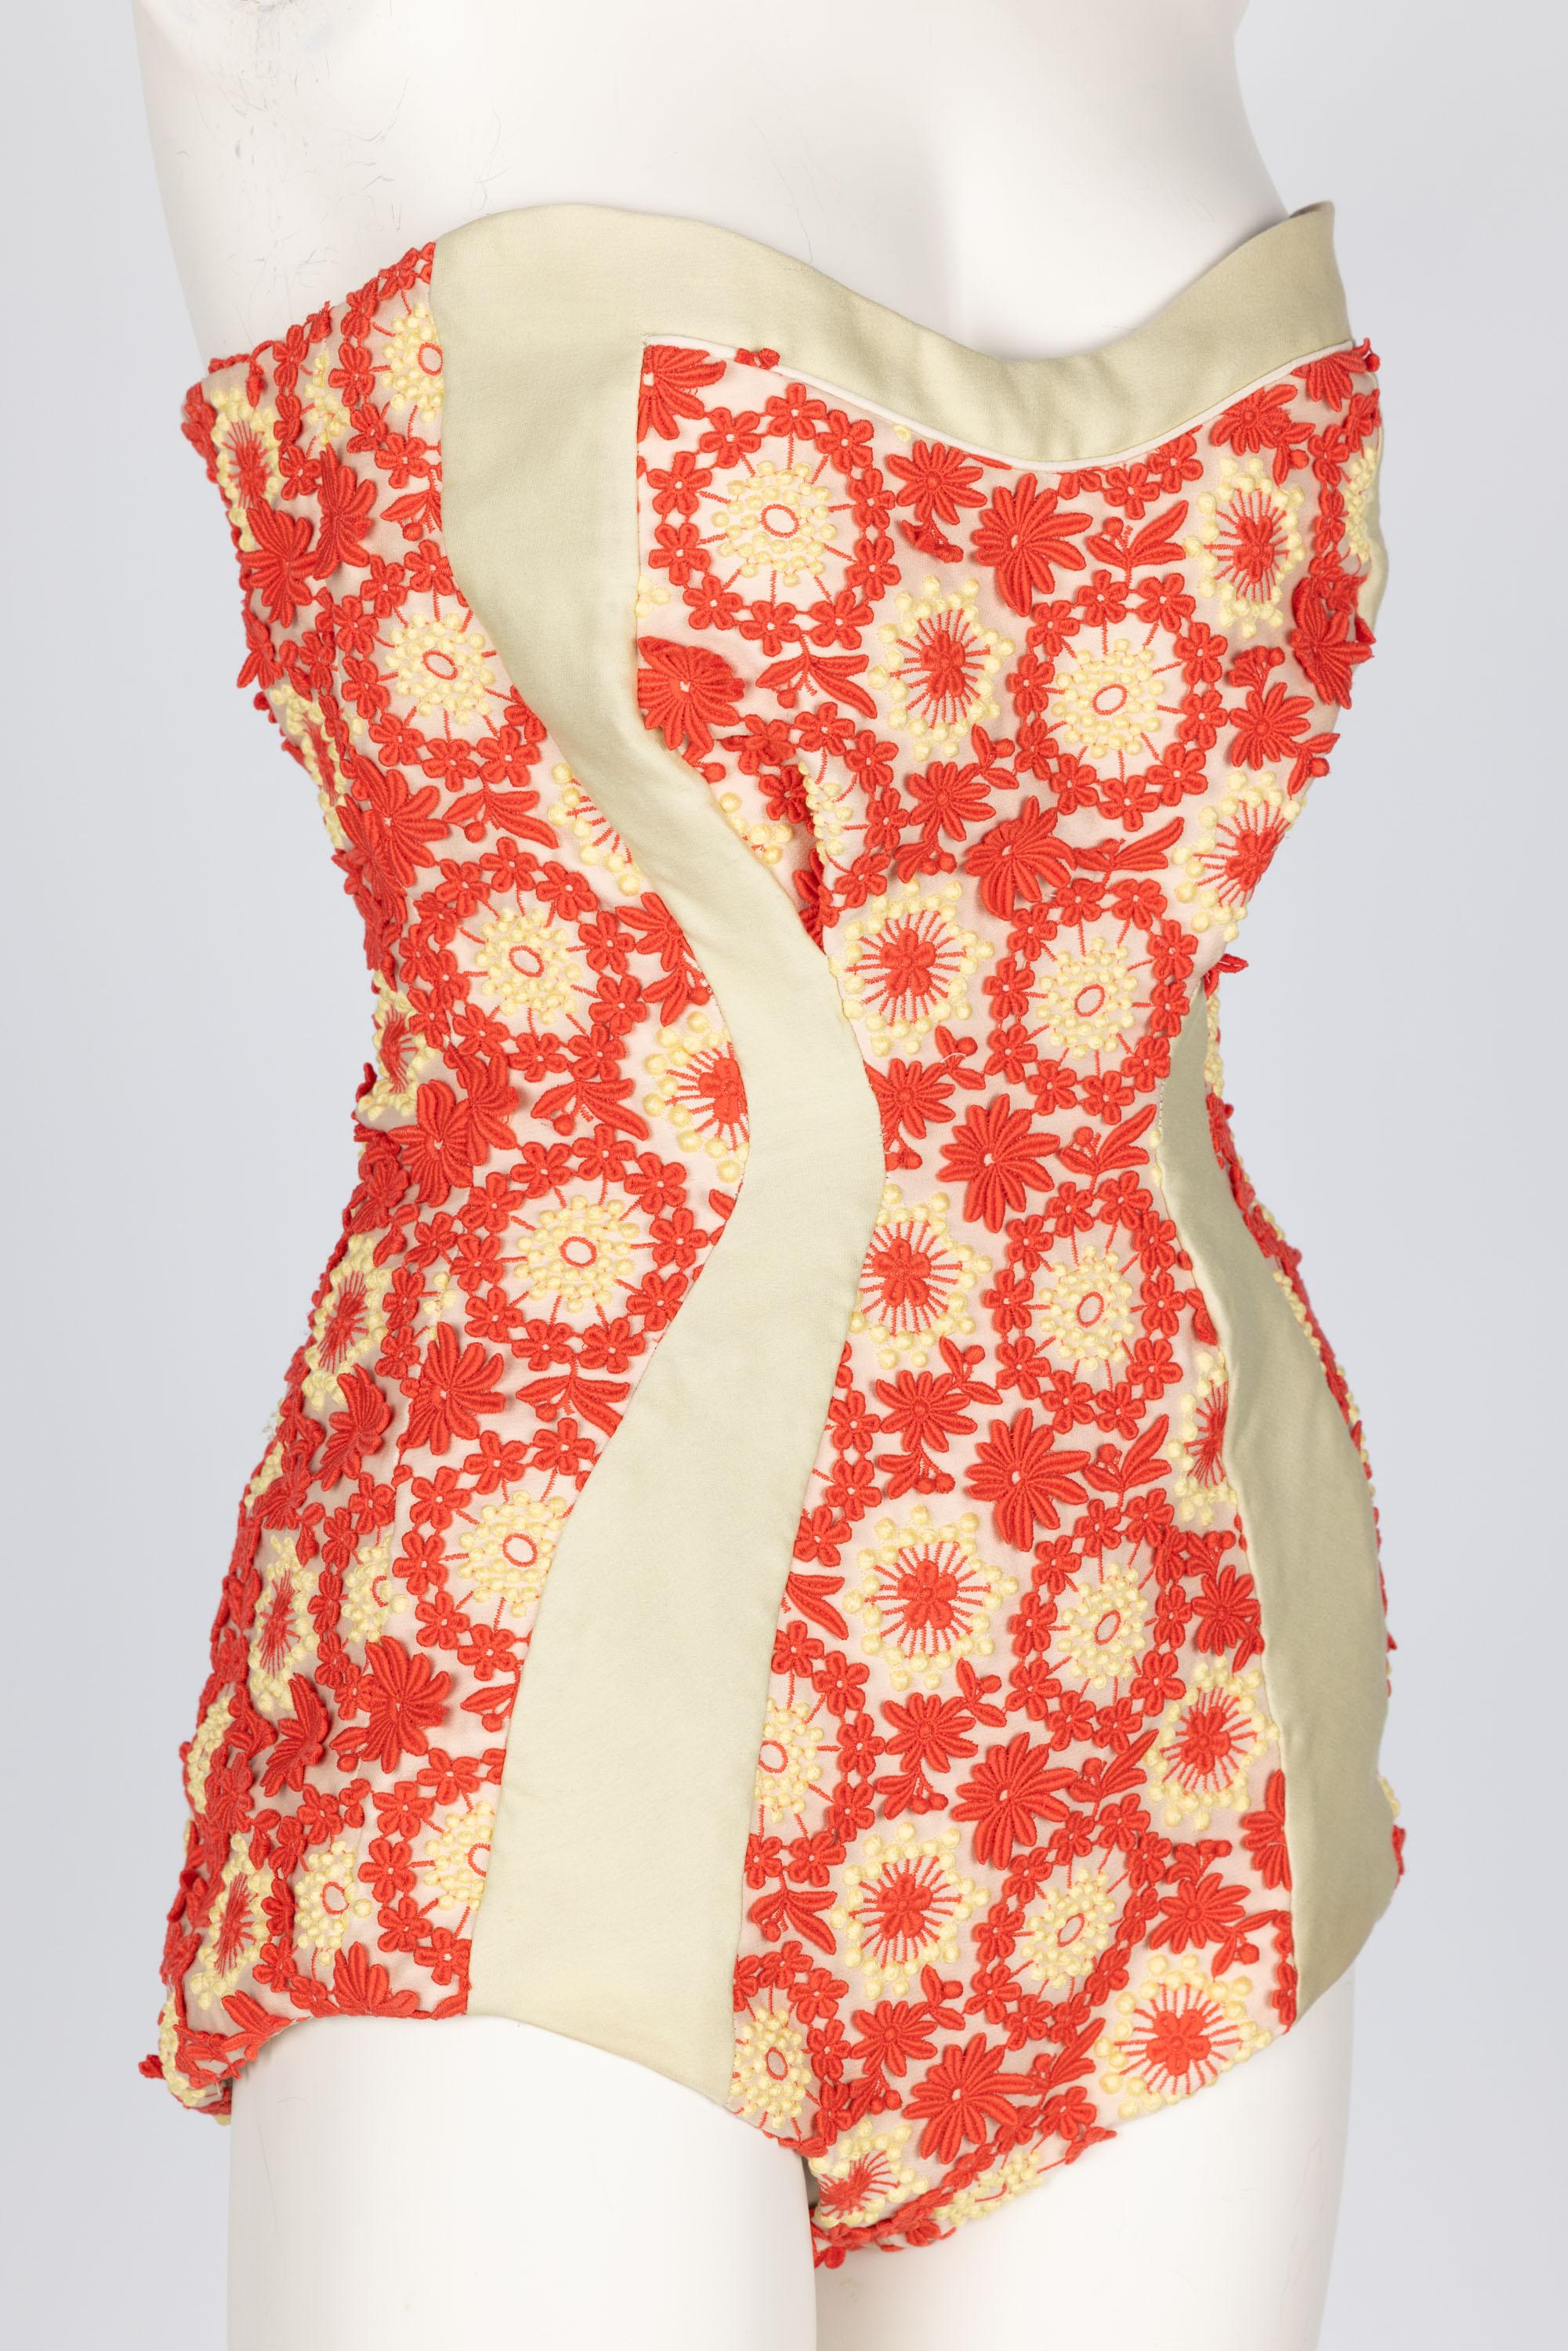 Women's Prada Most Wanted Spring 2012 Floral Embroidered Pinup Bodysuit For Sale